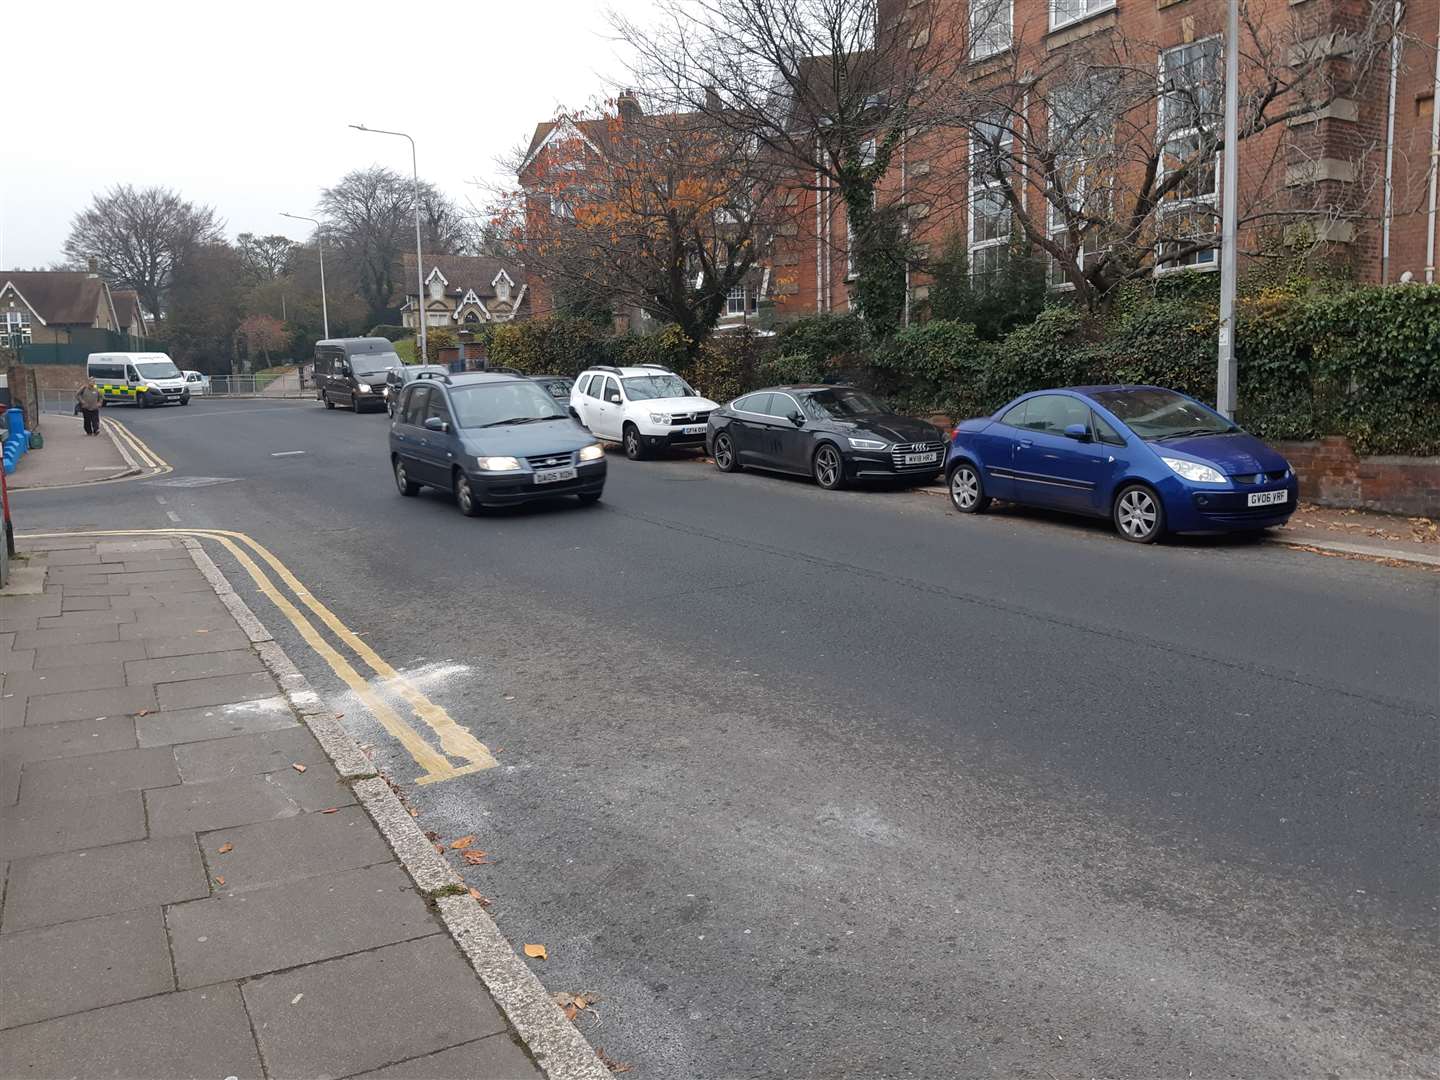 Frith Road, Dover where the hit and run happened